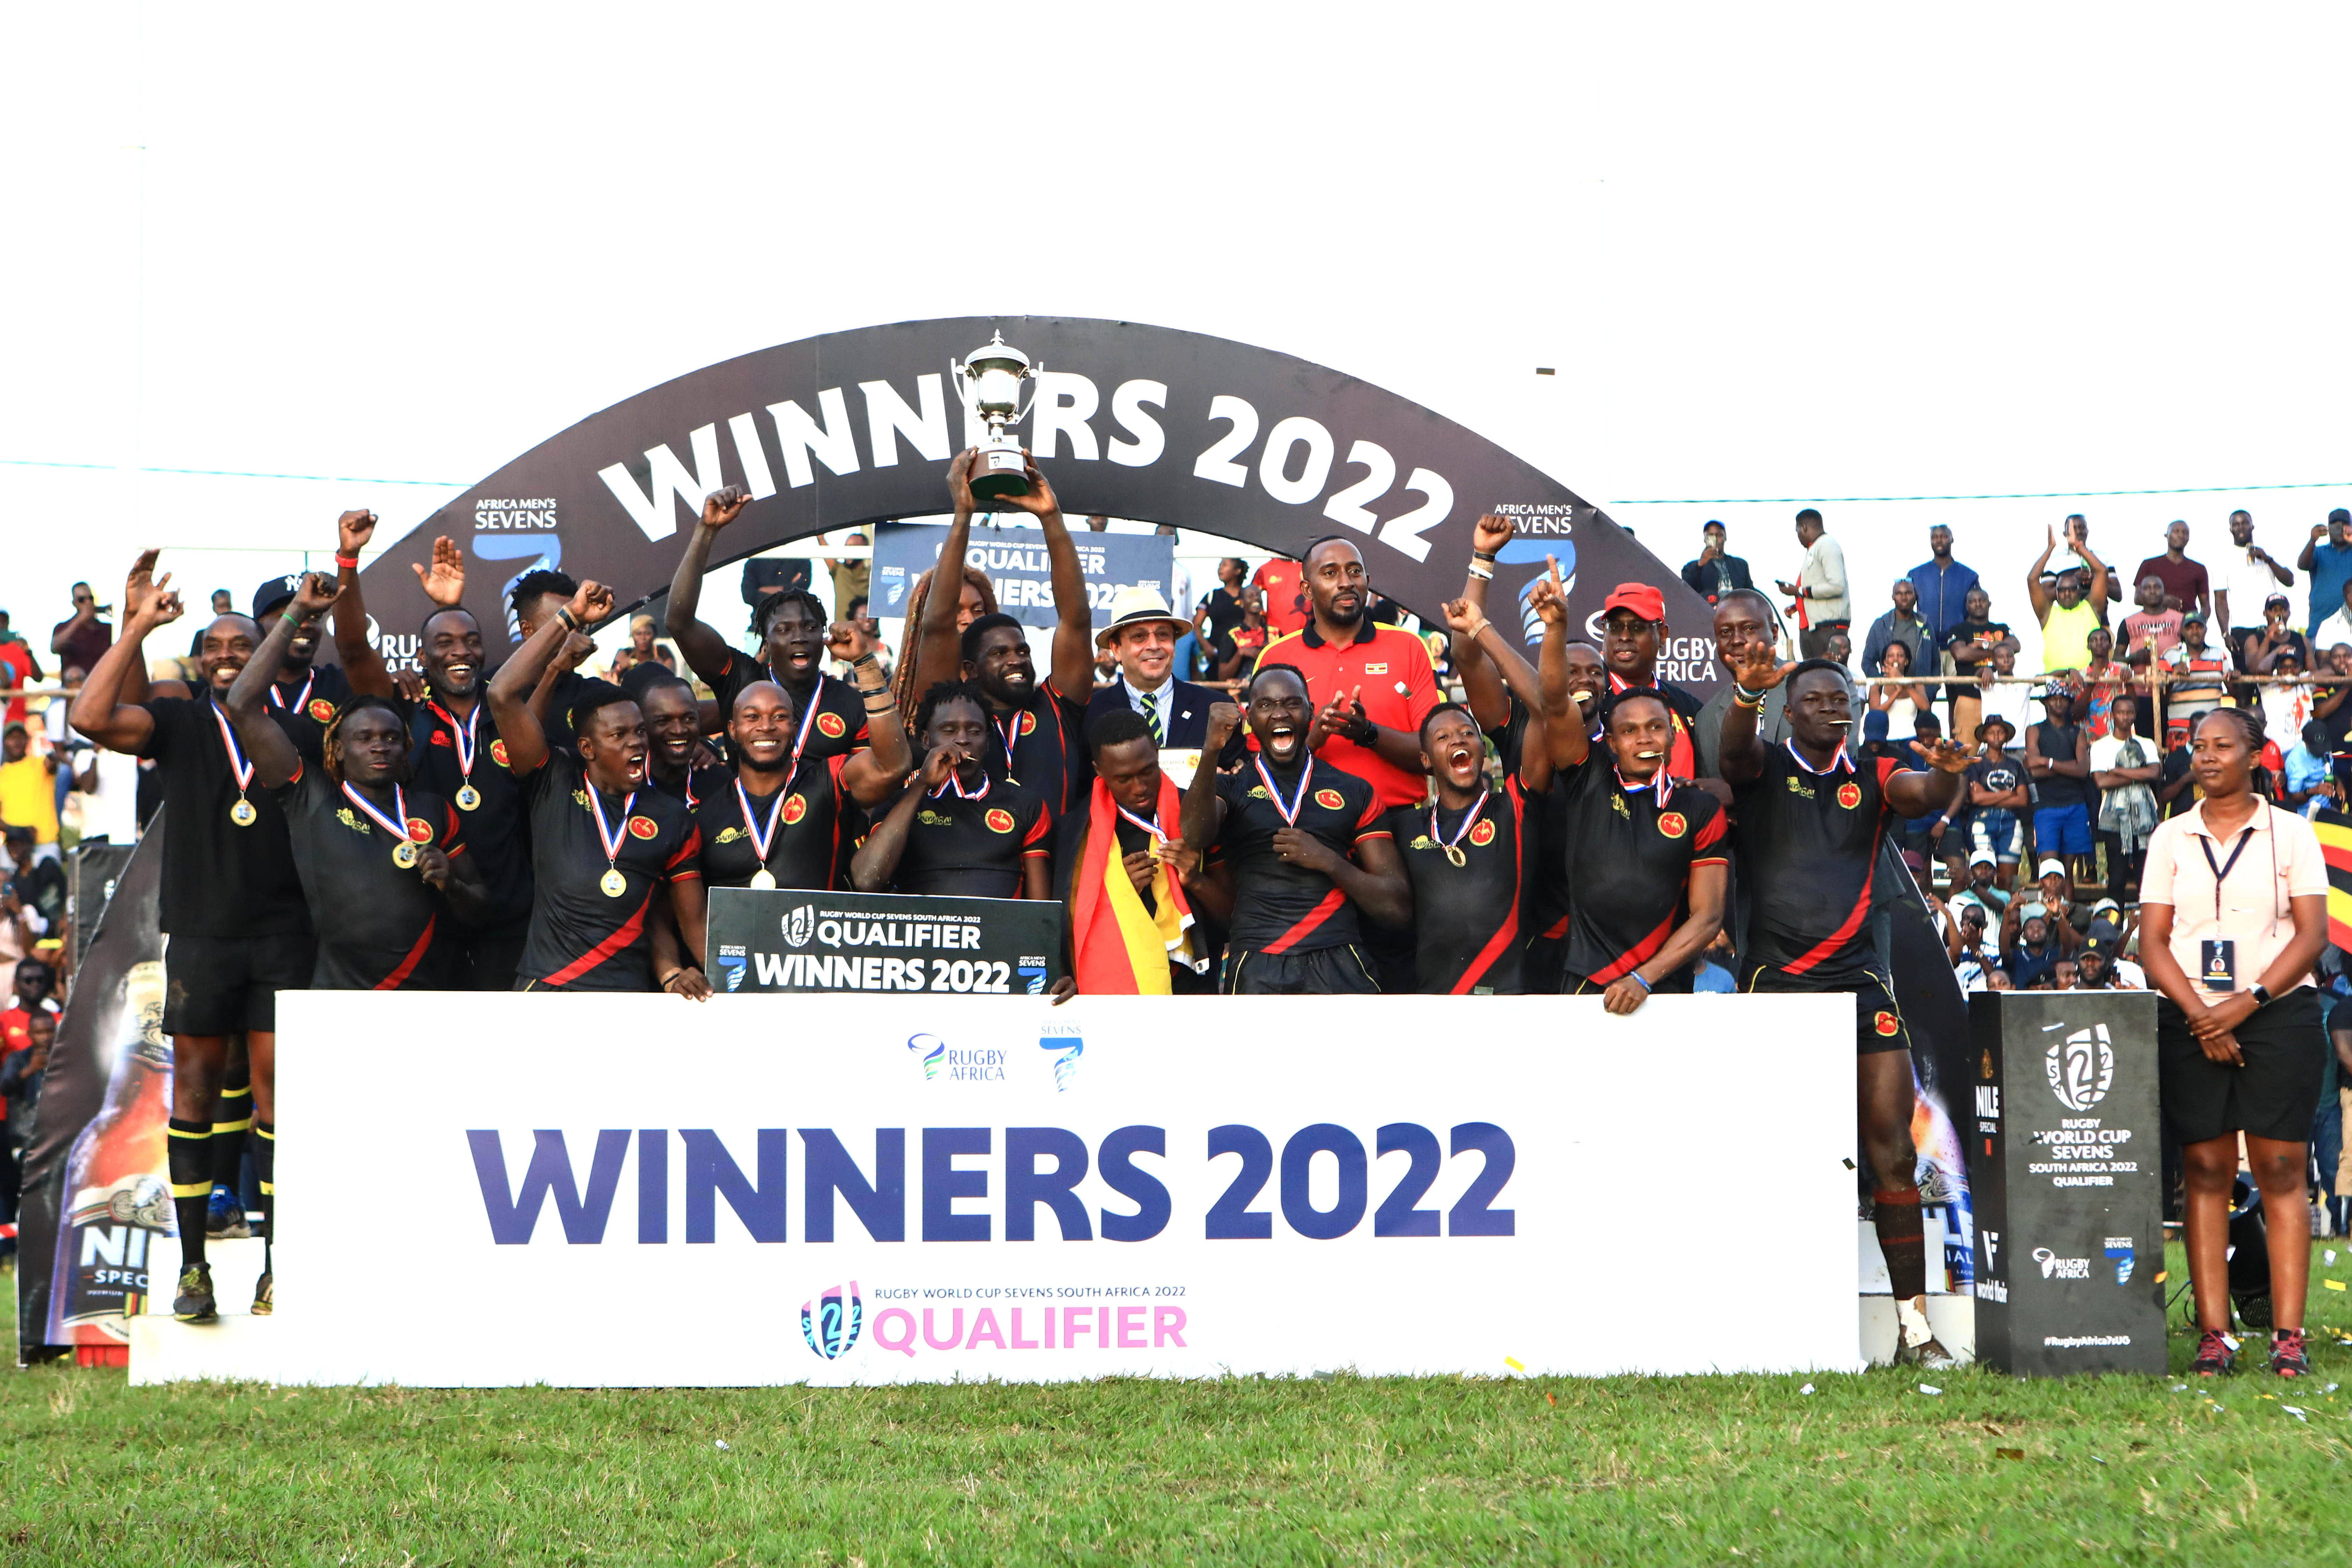 ganda celebrates during the awarding ceremony after beating Zimbabwe 28-0 in the final of the 2022 Rugby Africa Sevens at the Kyadondo Rugby Club